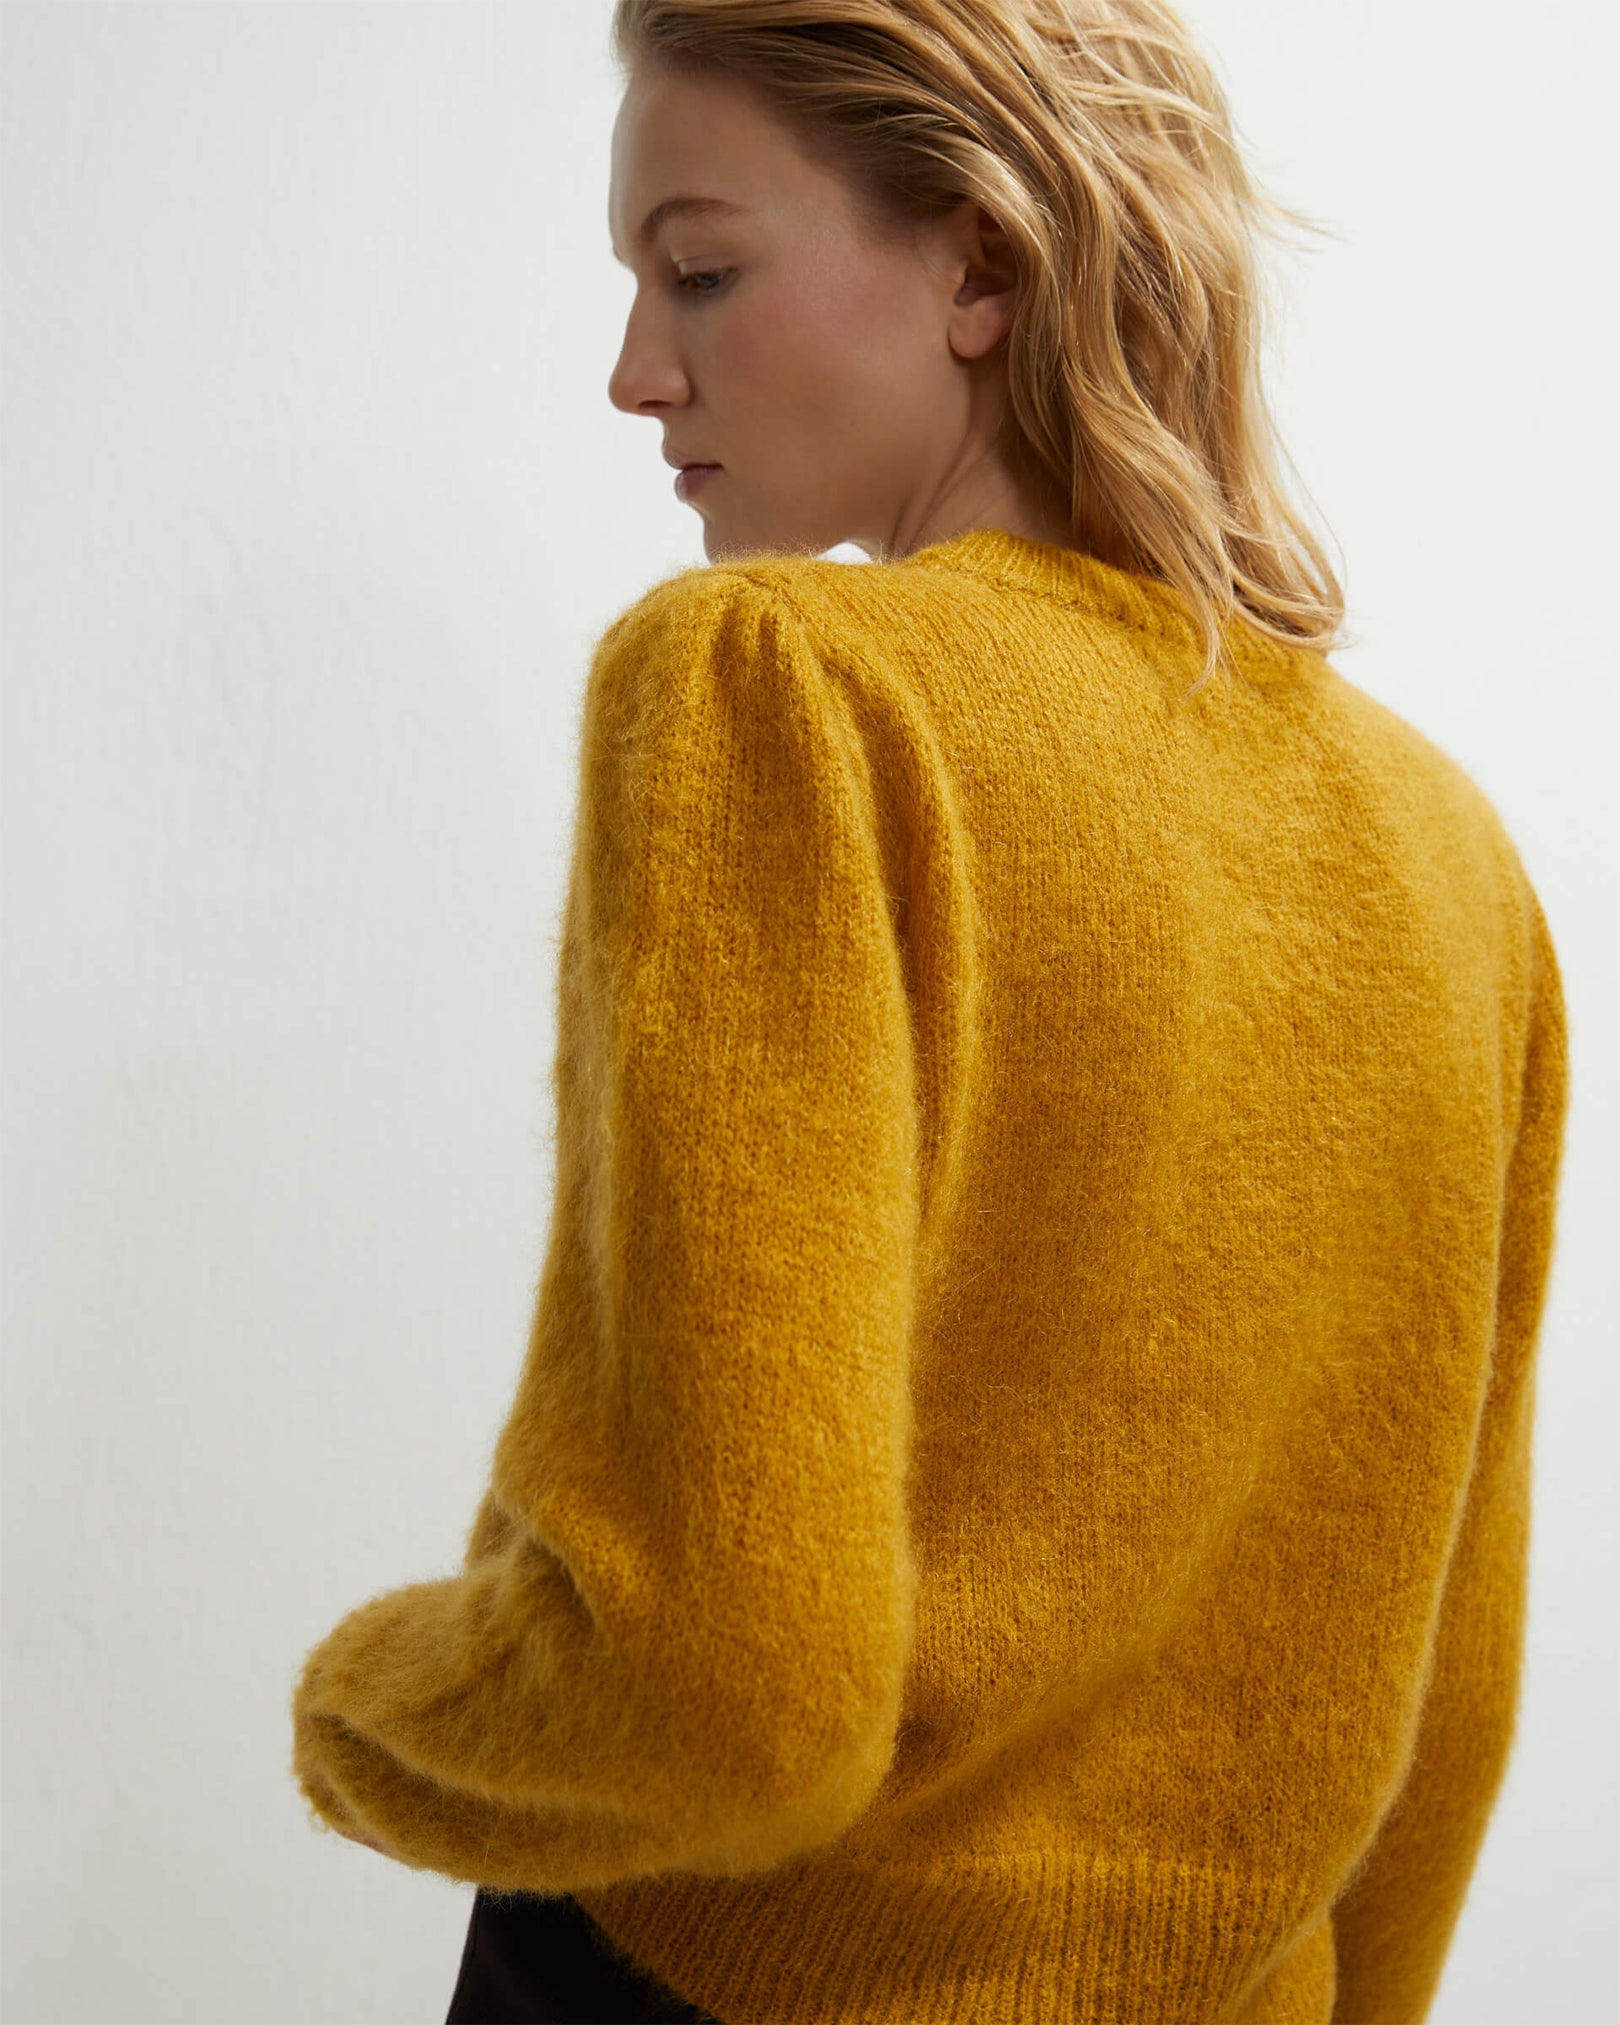 BEATRICE.B Cat Crewneck Sweater in Chartreuse available at Lahn.shop